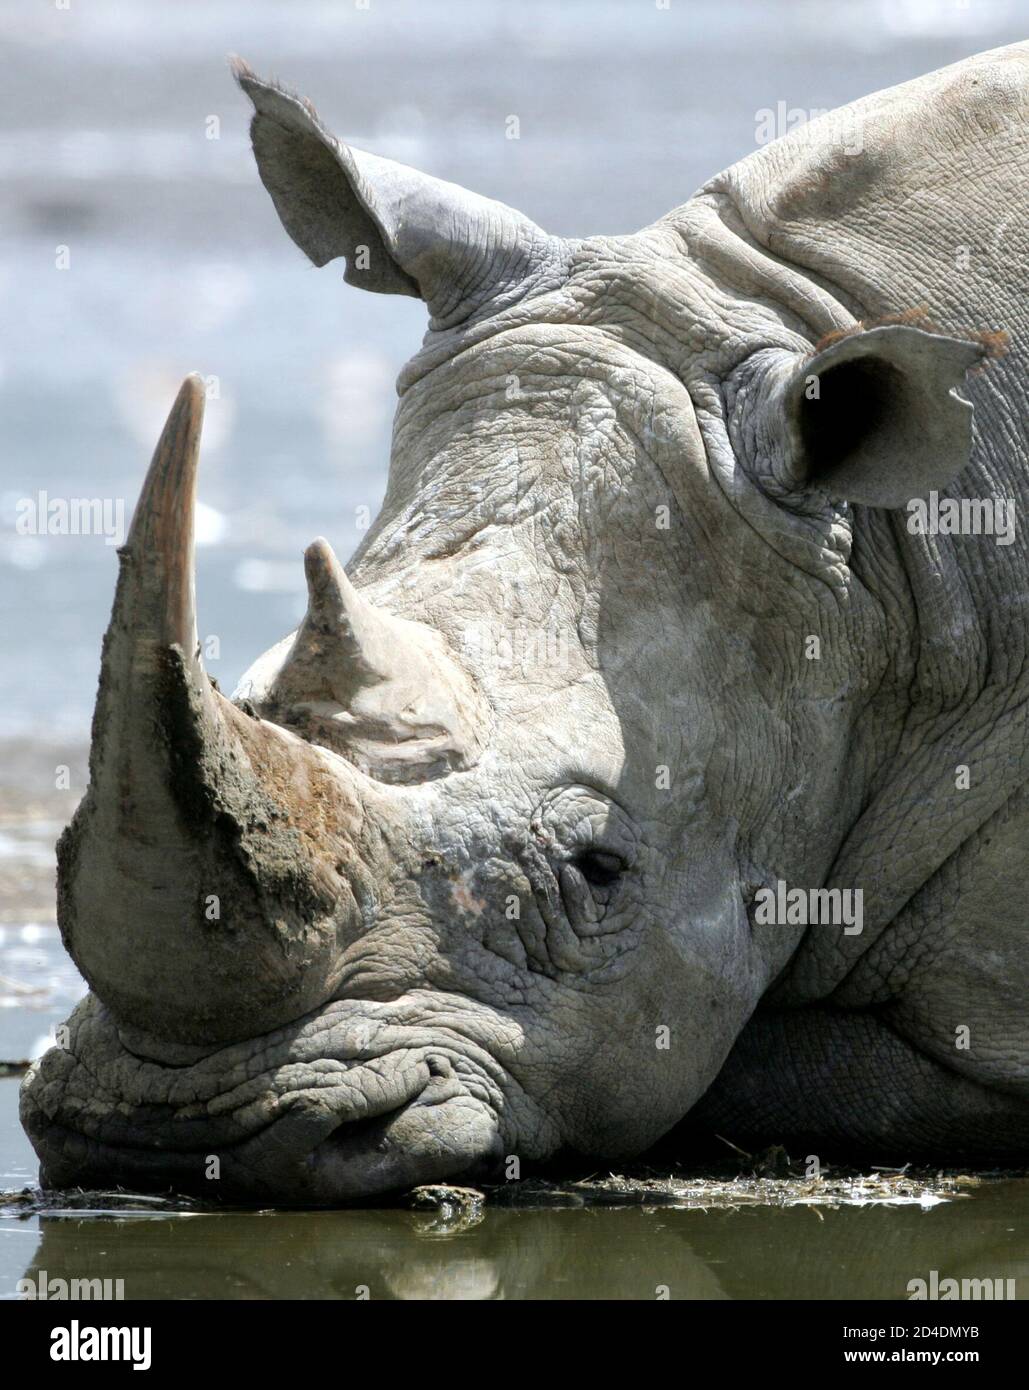 A square-lipped or white rhinocerus cools himself in the water of lake Nakuru, 120 km (74 miles) west of capital Nairobi, January 8, 2005. A new wave of poaching activities in key wildlife habitats in Kenya has killed several elephants and rhinos, the country's wildlife agency Kenya Wildlife Services (KWS) said. Even though Kenya has declared its elephants and rhinos endangered species and banned any trade on them or their products, the animals remain highly vulnerable to poaching, despite efforts by KWS to safeguard them. Kenya lost 15 of its 450 rhinos to poachers in the last year. REUTERS/R Stock Photo